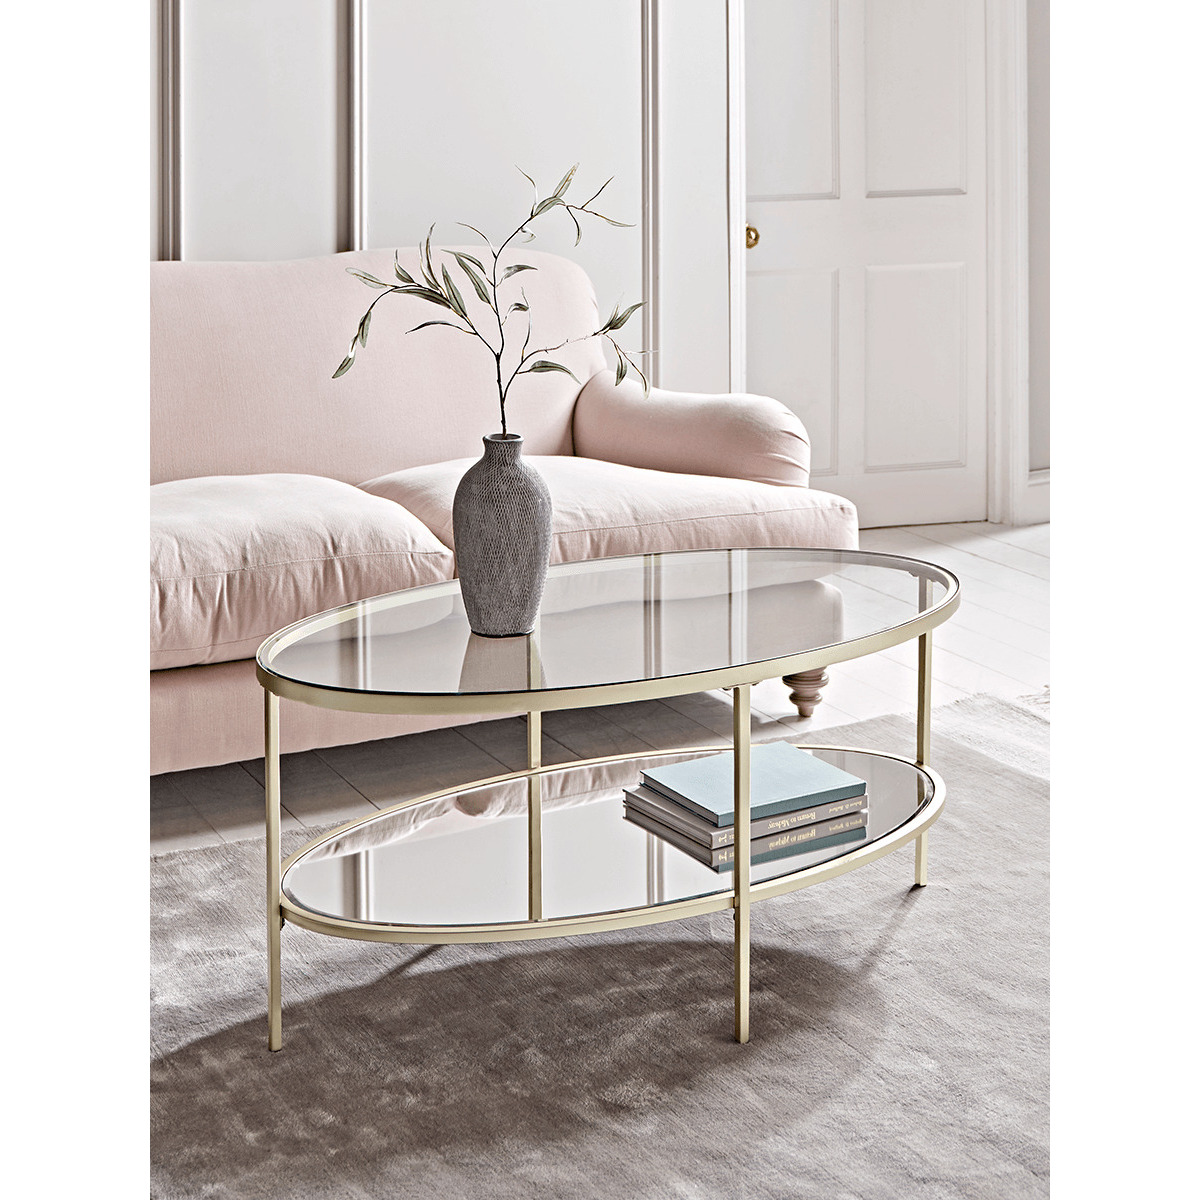 Glass Display Coffee Table - Soft Gold - image 1